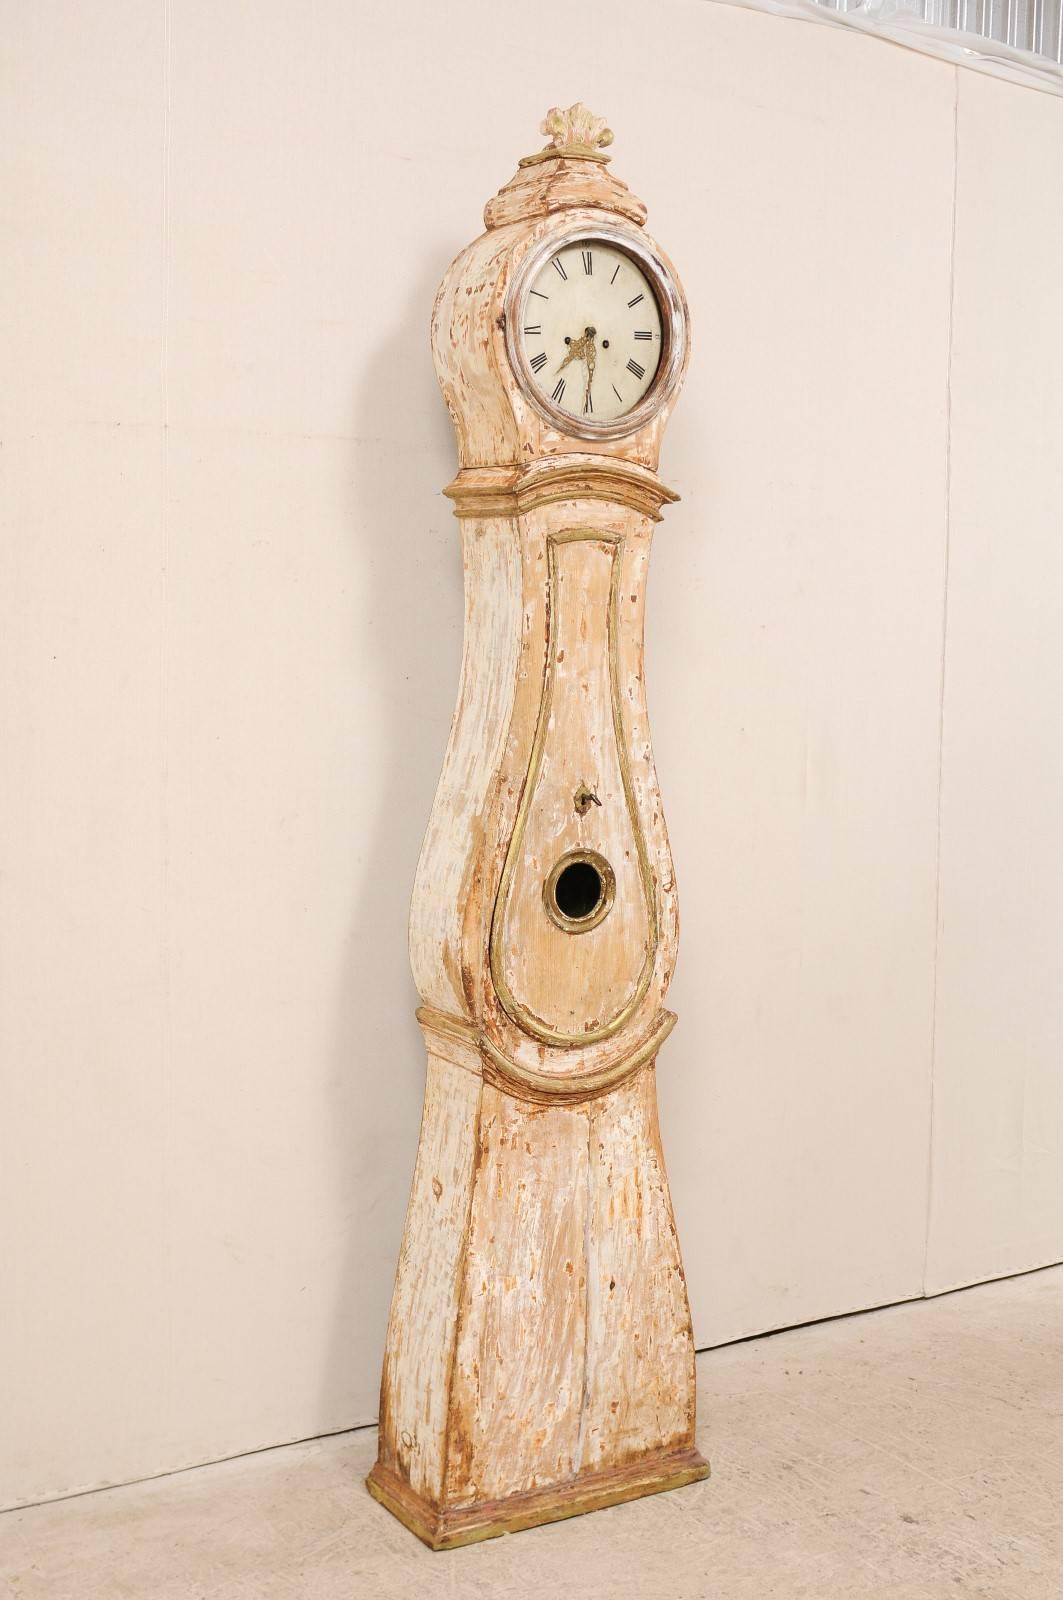 Carved 19th Century Swedish Floor Clock Scraped to Original Lovely Natural Wood Finish For Sale